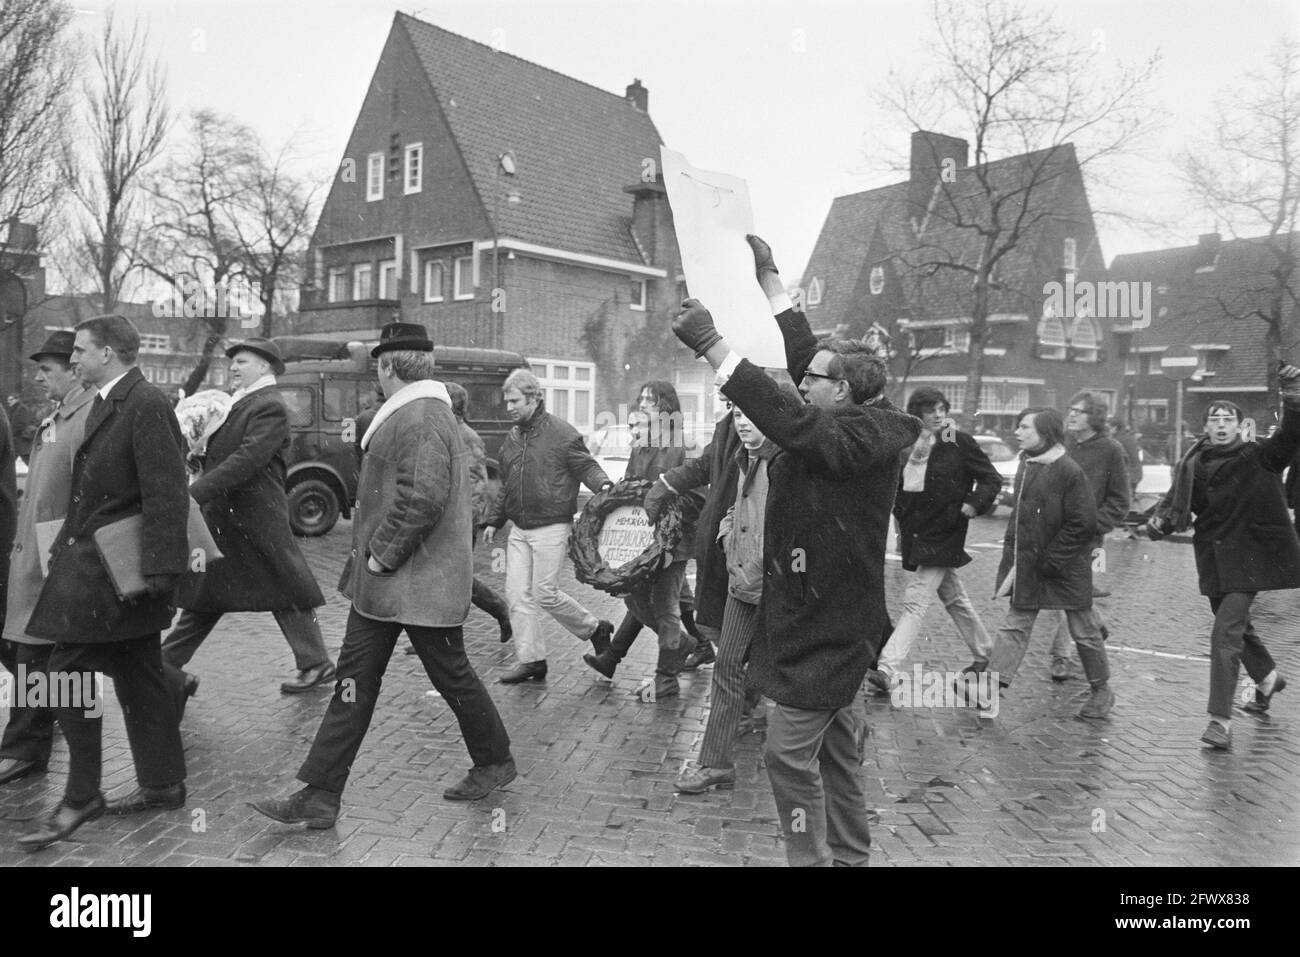 Amsterdam. Wreath laying at the Van Heutsz monument: third from left a nephew of General Kruls being booed by leftist protesters, 3 February 1968, demonstrations, memorials, history, colonialism, wreaths, wreath laying, overseas territories, The Netherlands, 20th century press agency photo, news to remember, documentary, historic photography 1945-1990, visual stories, human history of the Twentieth Century, capturing moments in time Stock Photo